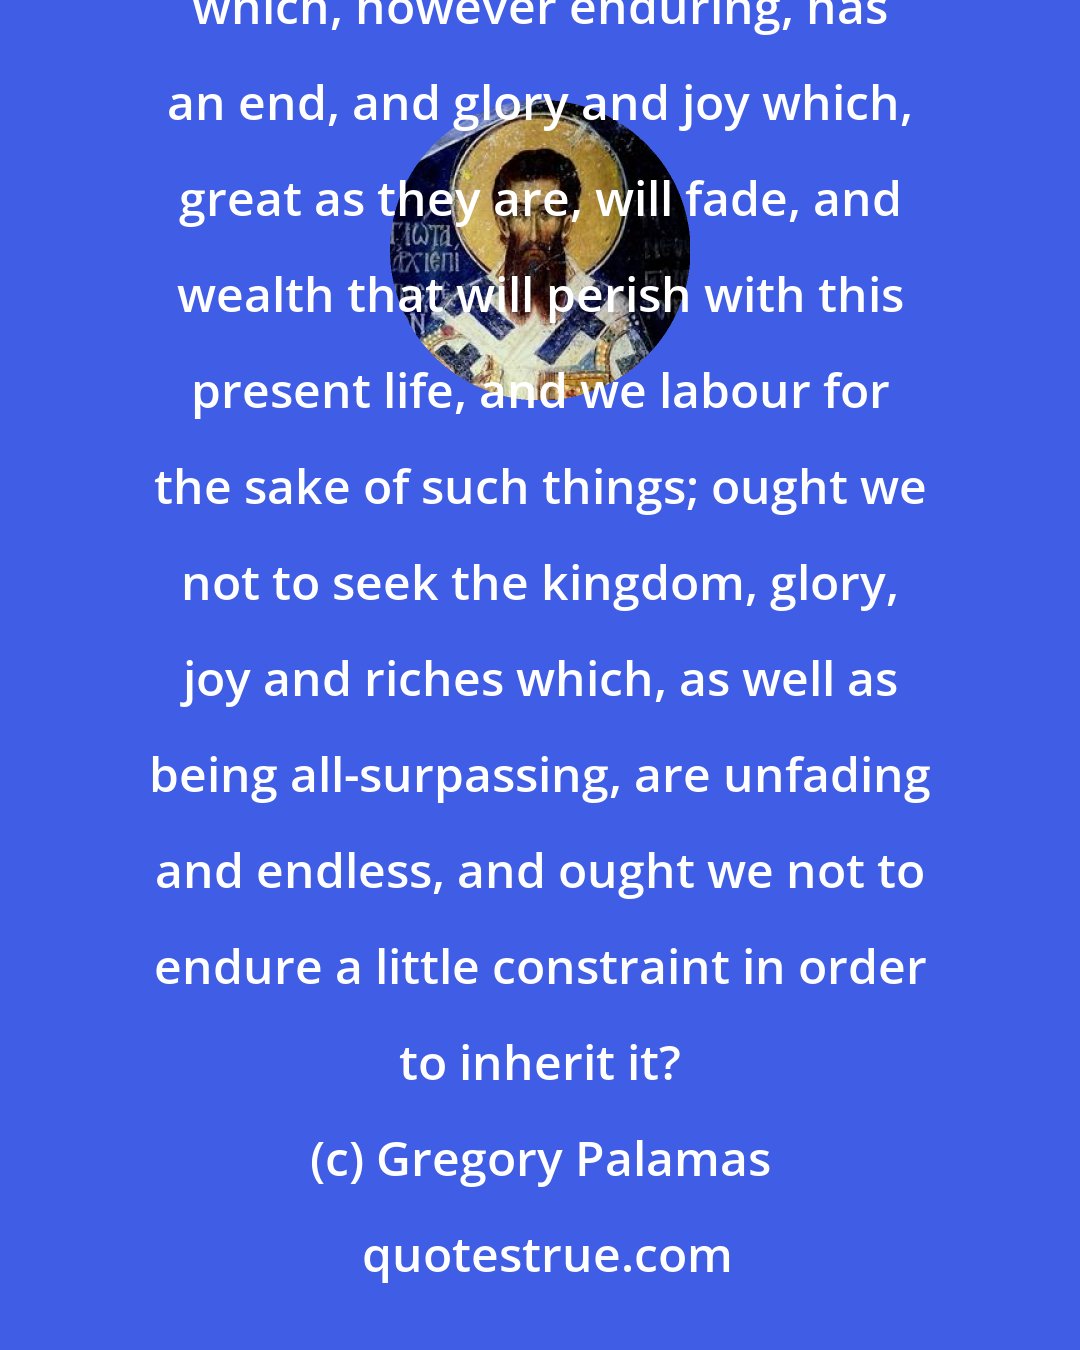 Gregory Palamas: Given that we desire long life, should we not take eternal life into account? If we long for a kingdom which, however enduring, has an end, and glory and joy which, great as they are, will fade, and wealth that will perish with this present life, and we labour for the sake of such things; ought we not to seek the kingdom, glory, joy and riches which, as well as being all-surpassing, are unfading and endless, and ought we not to endure a little constraint in order to inherit it?